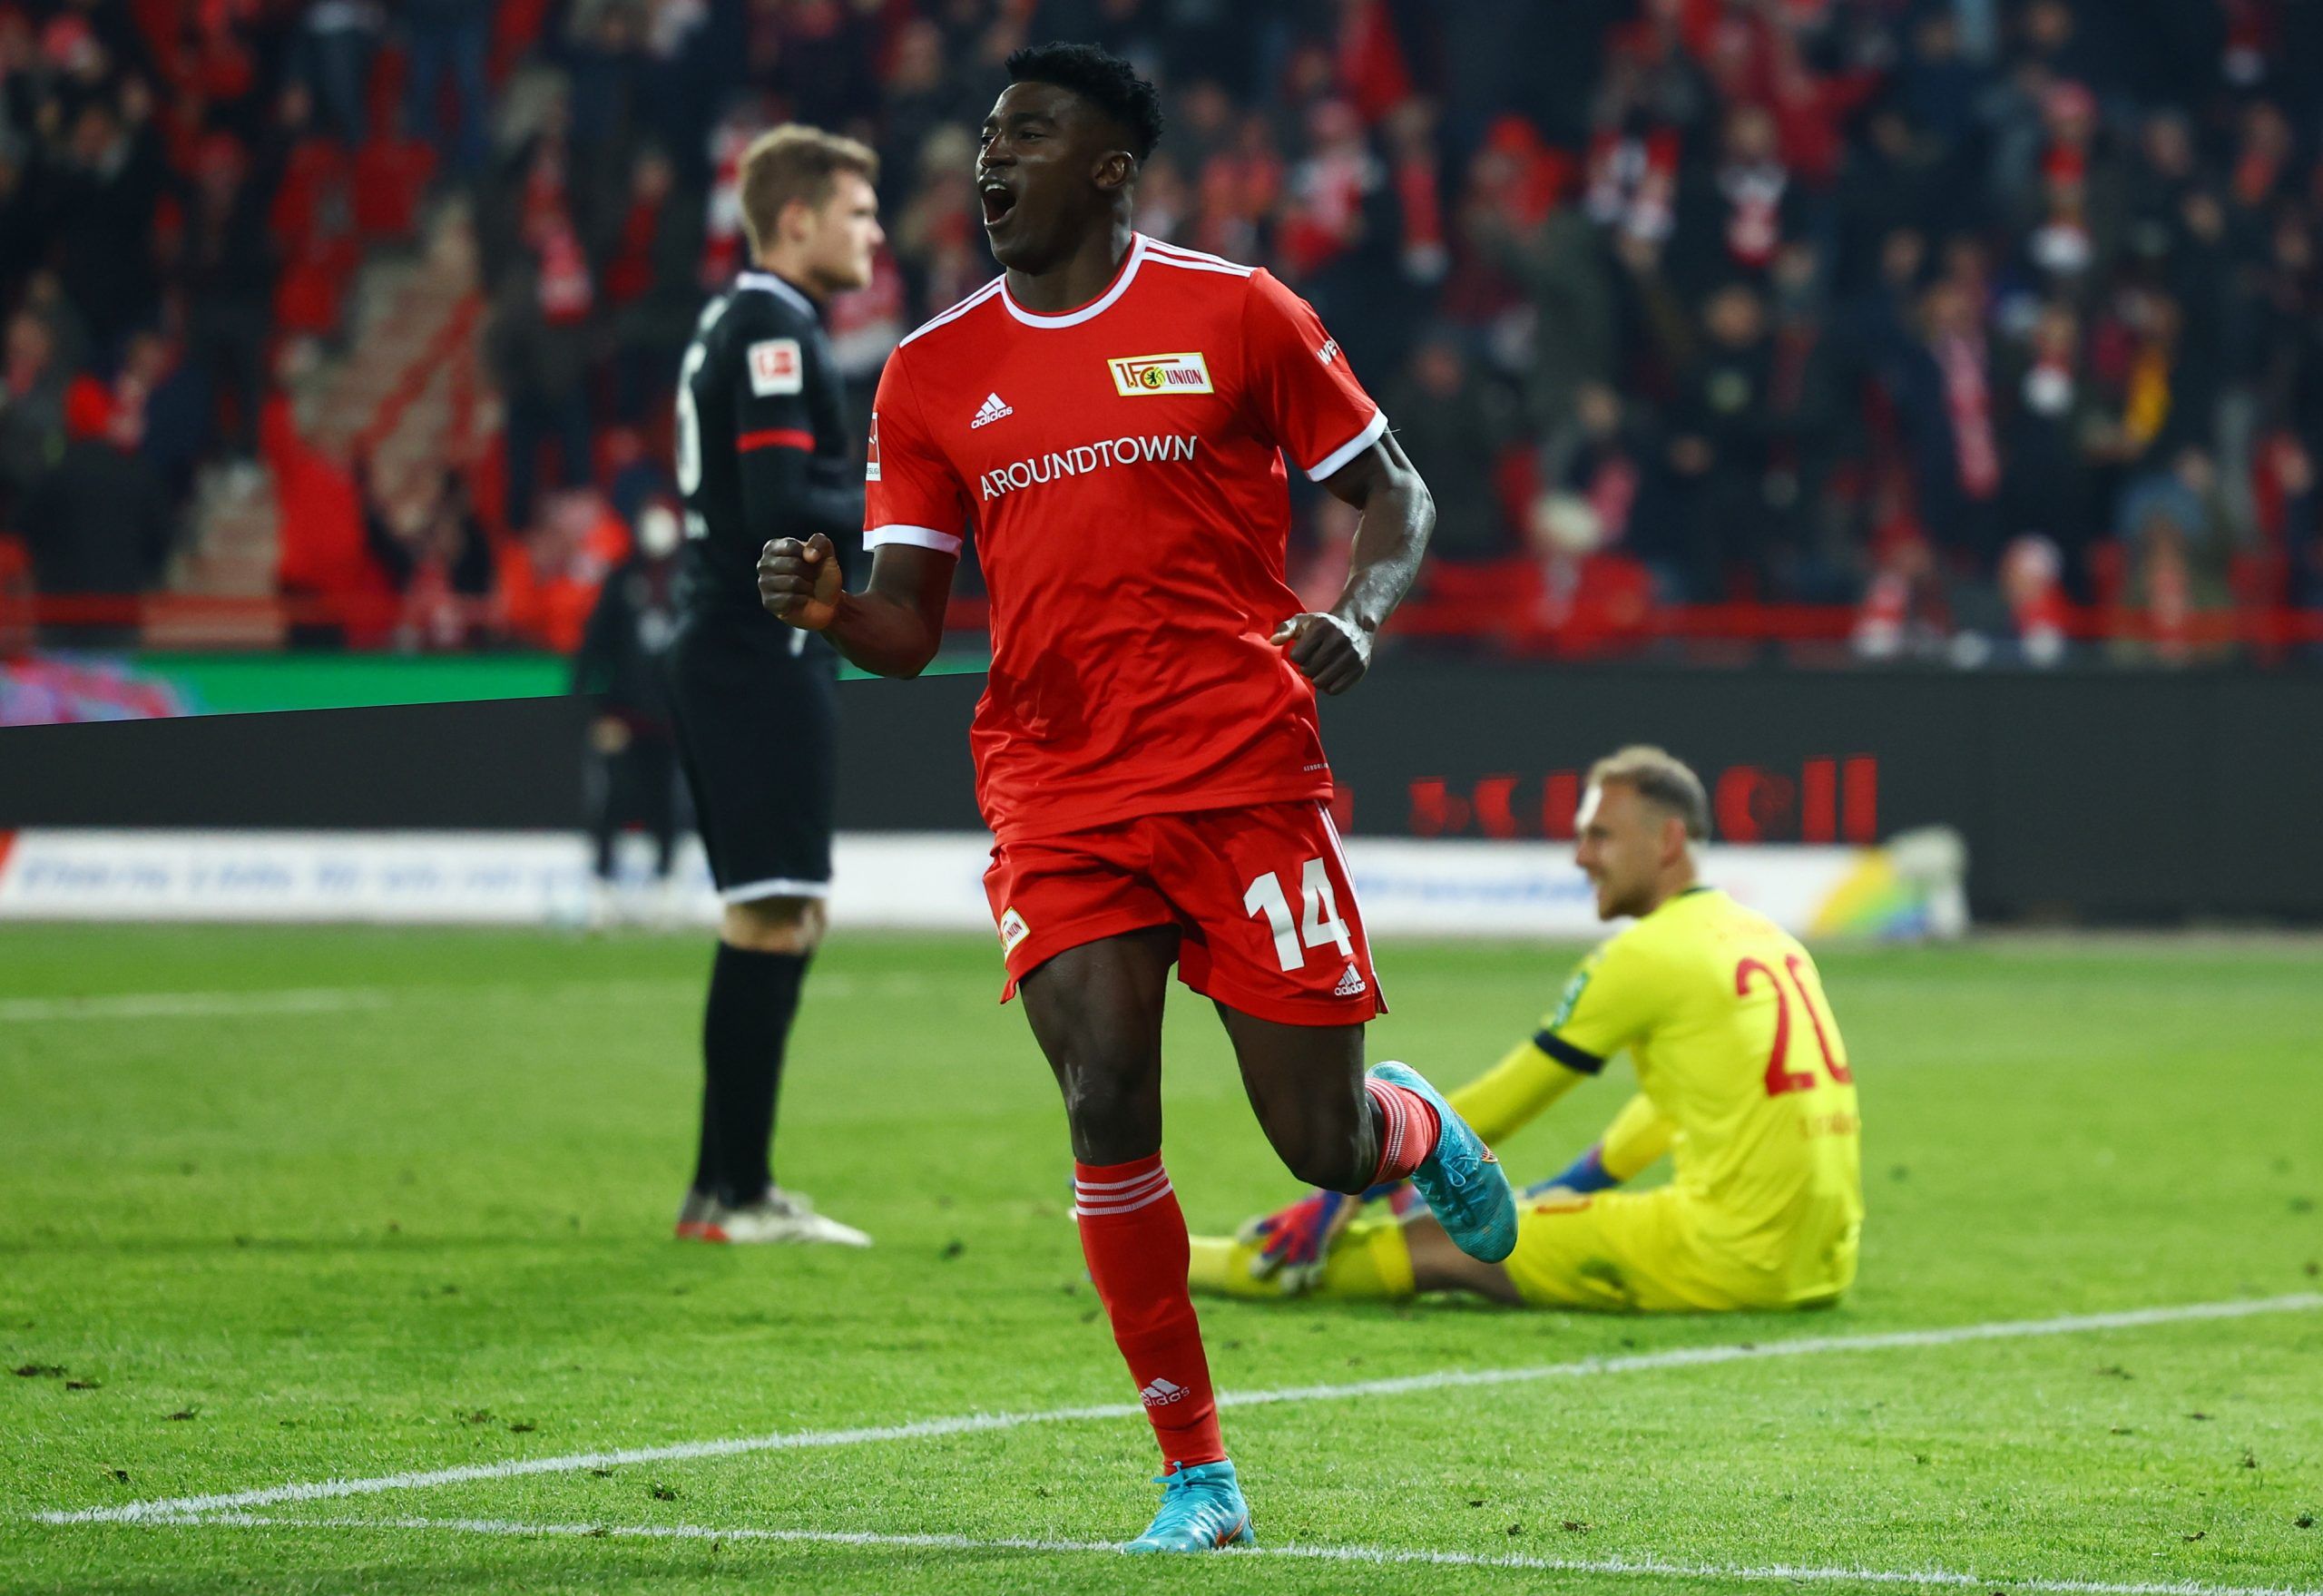 taiwo-awoniyi-union-berlin-bundesliga-nottingham-forest-premier-league-liverpool-transfer-news-latestSoccer Football - Bundesliga - 1. FC Union Berlin v FC Cologne - Stadion An der Alten Forsterei, Berlin, Germany - April 1, 2022 1. FC Union Berlin's Taiwo Awoniyi celebrates scoring their first goal REUTERS/Lisi Niesner DFL REGULATIONS PROHIBIT ANY USE OF PHOTOGRAPHS AS IMAGE SEQUENCES AND/OR QUASI-VIDEO.